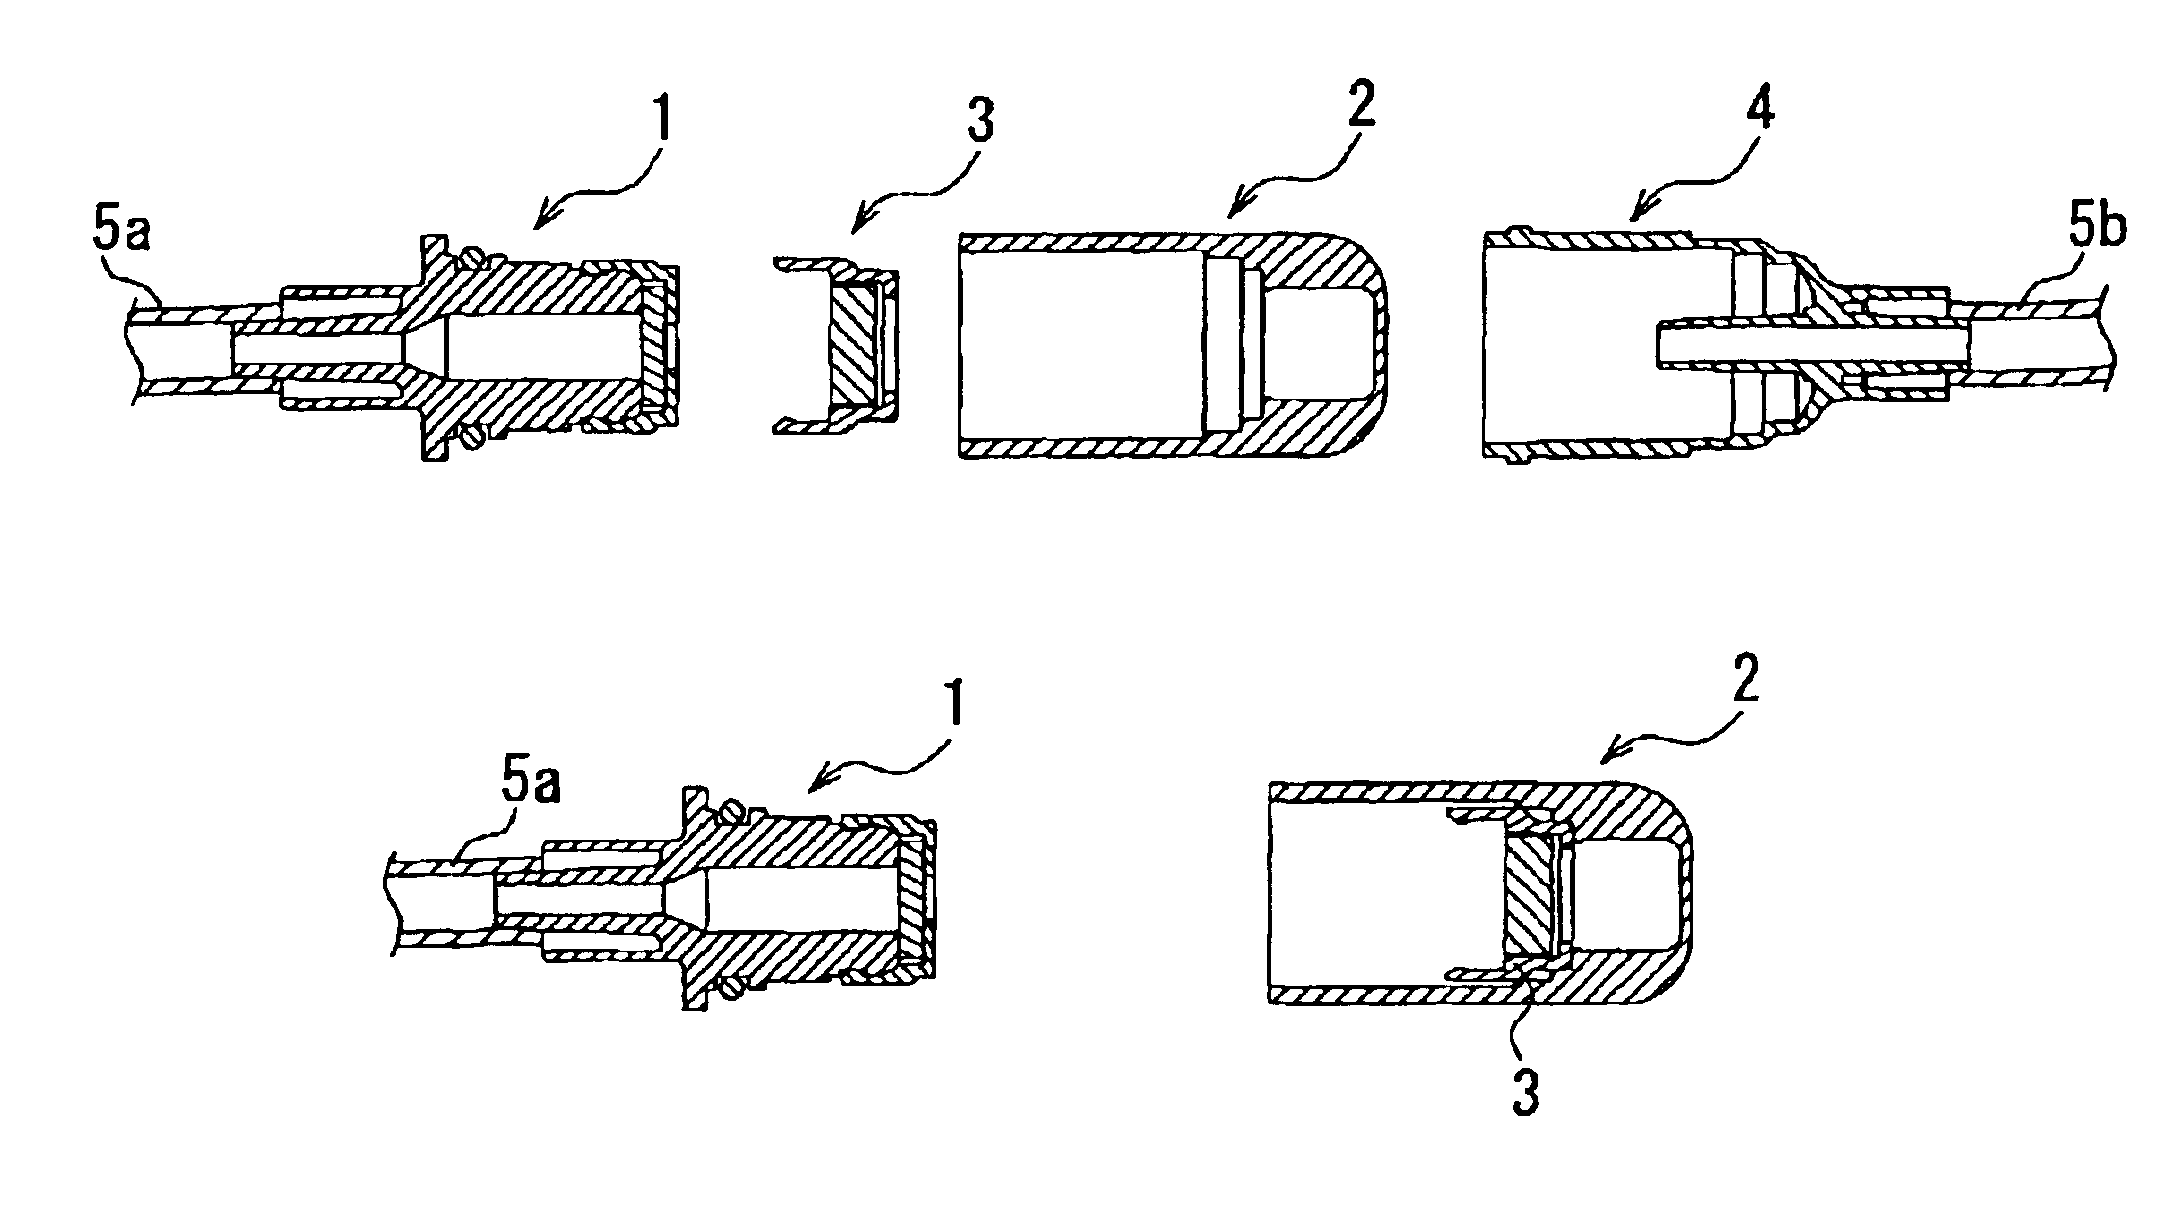 Connector system for sterile connection